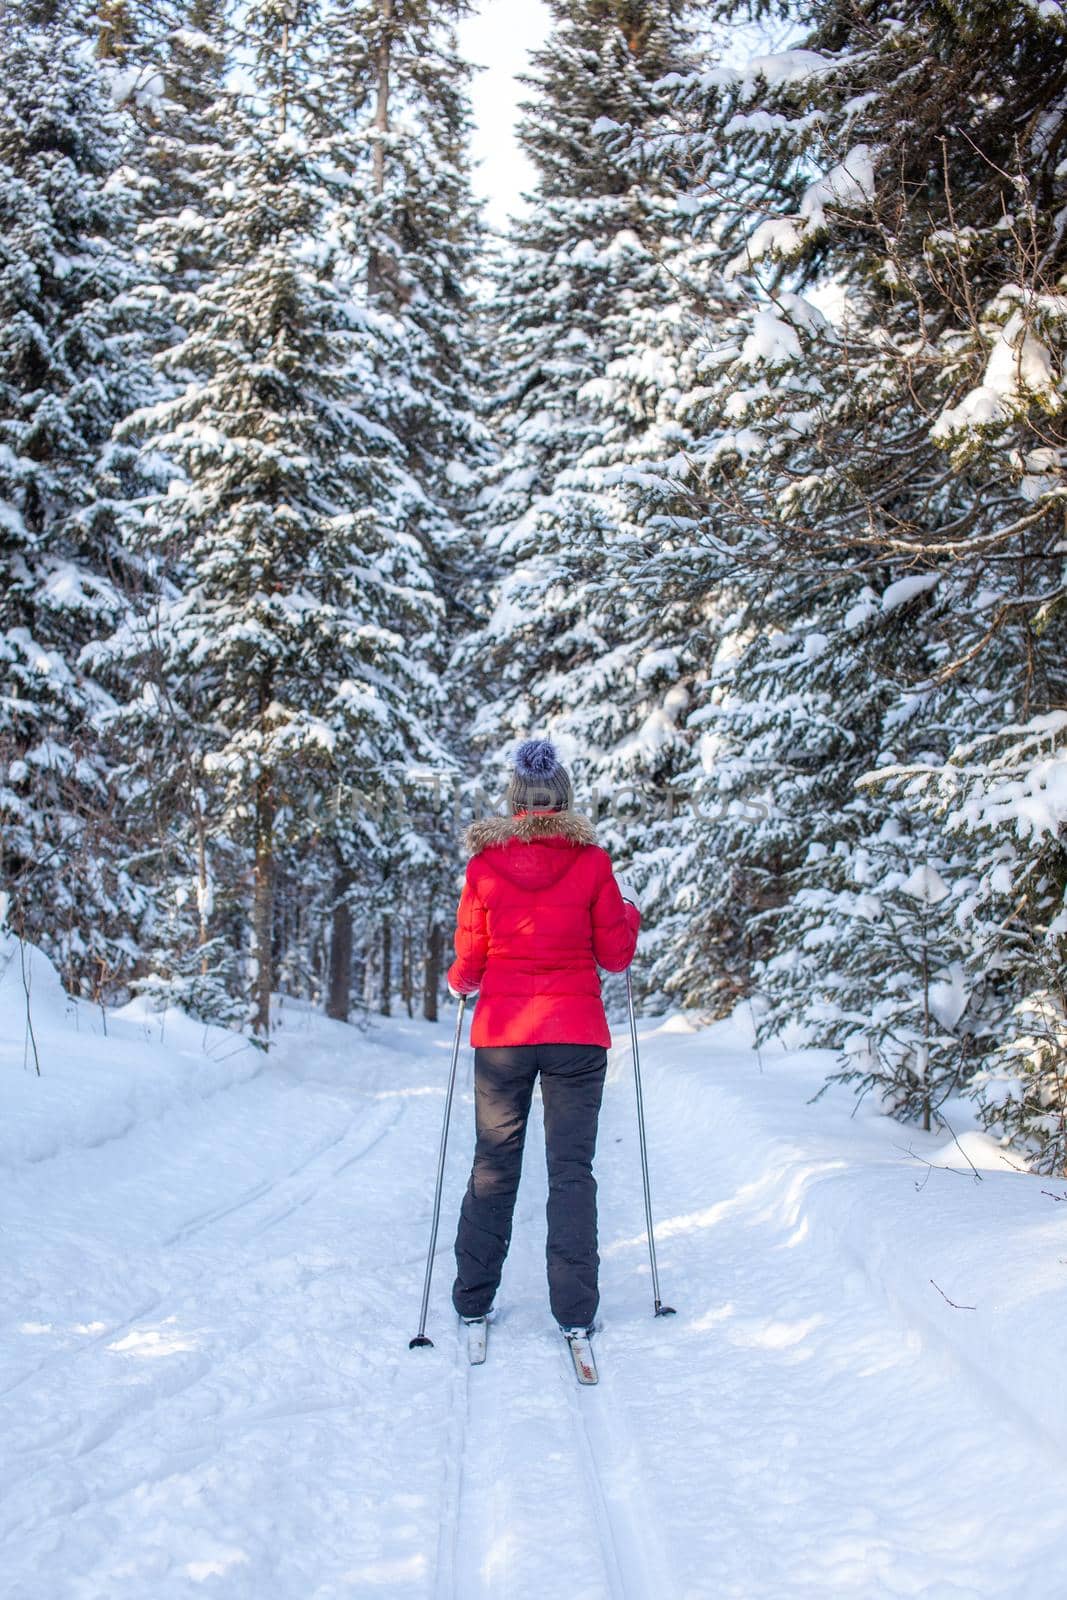 A girl in a red jacket goes skiing in a snowy forest in winter. The view from the back. Snow background with skis between the trees.